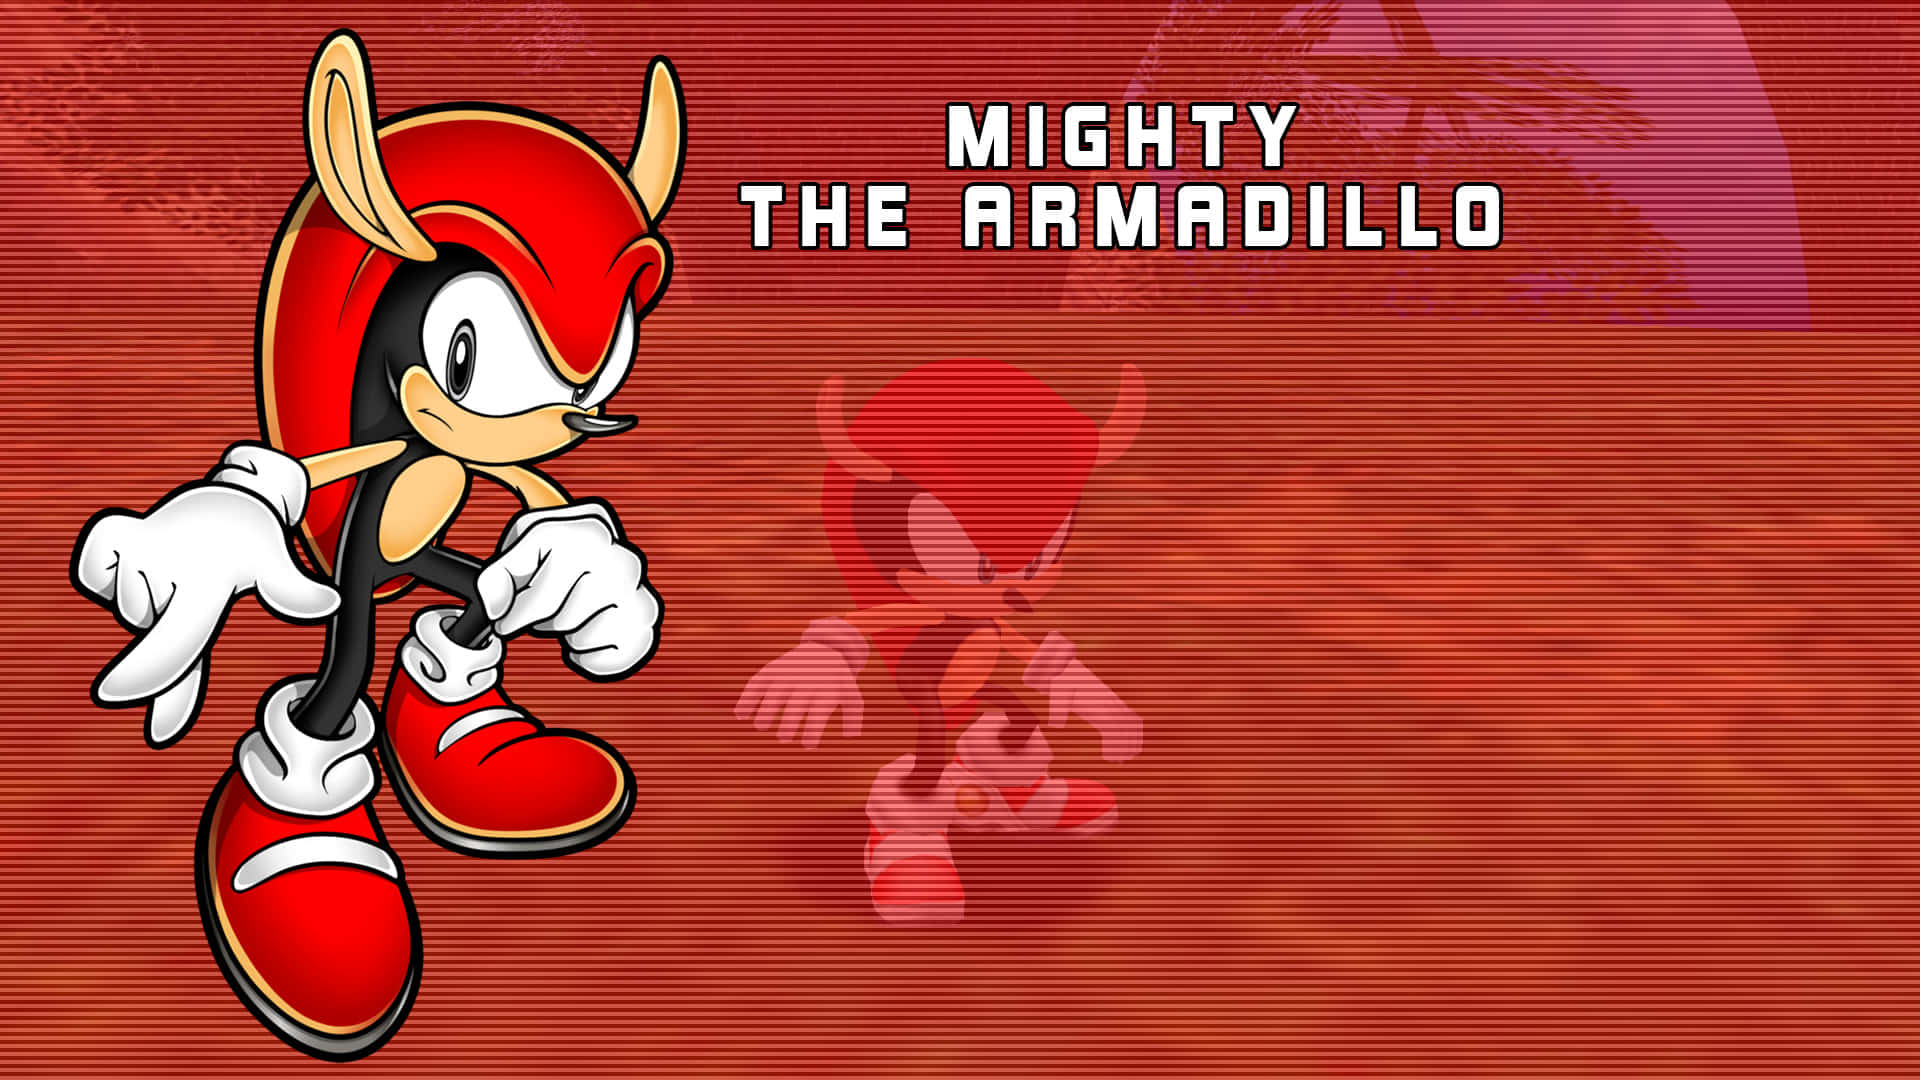 Download Mighty The Armadillo 1920 X 1080 Wallpaper Wallpaper ...